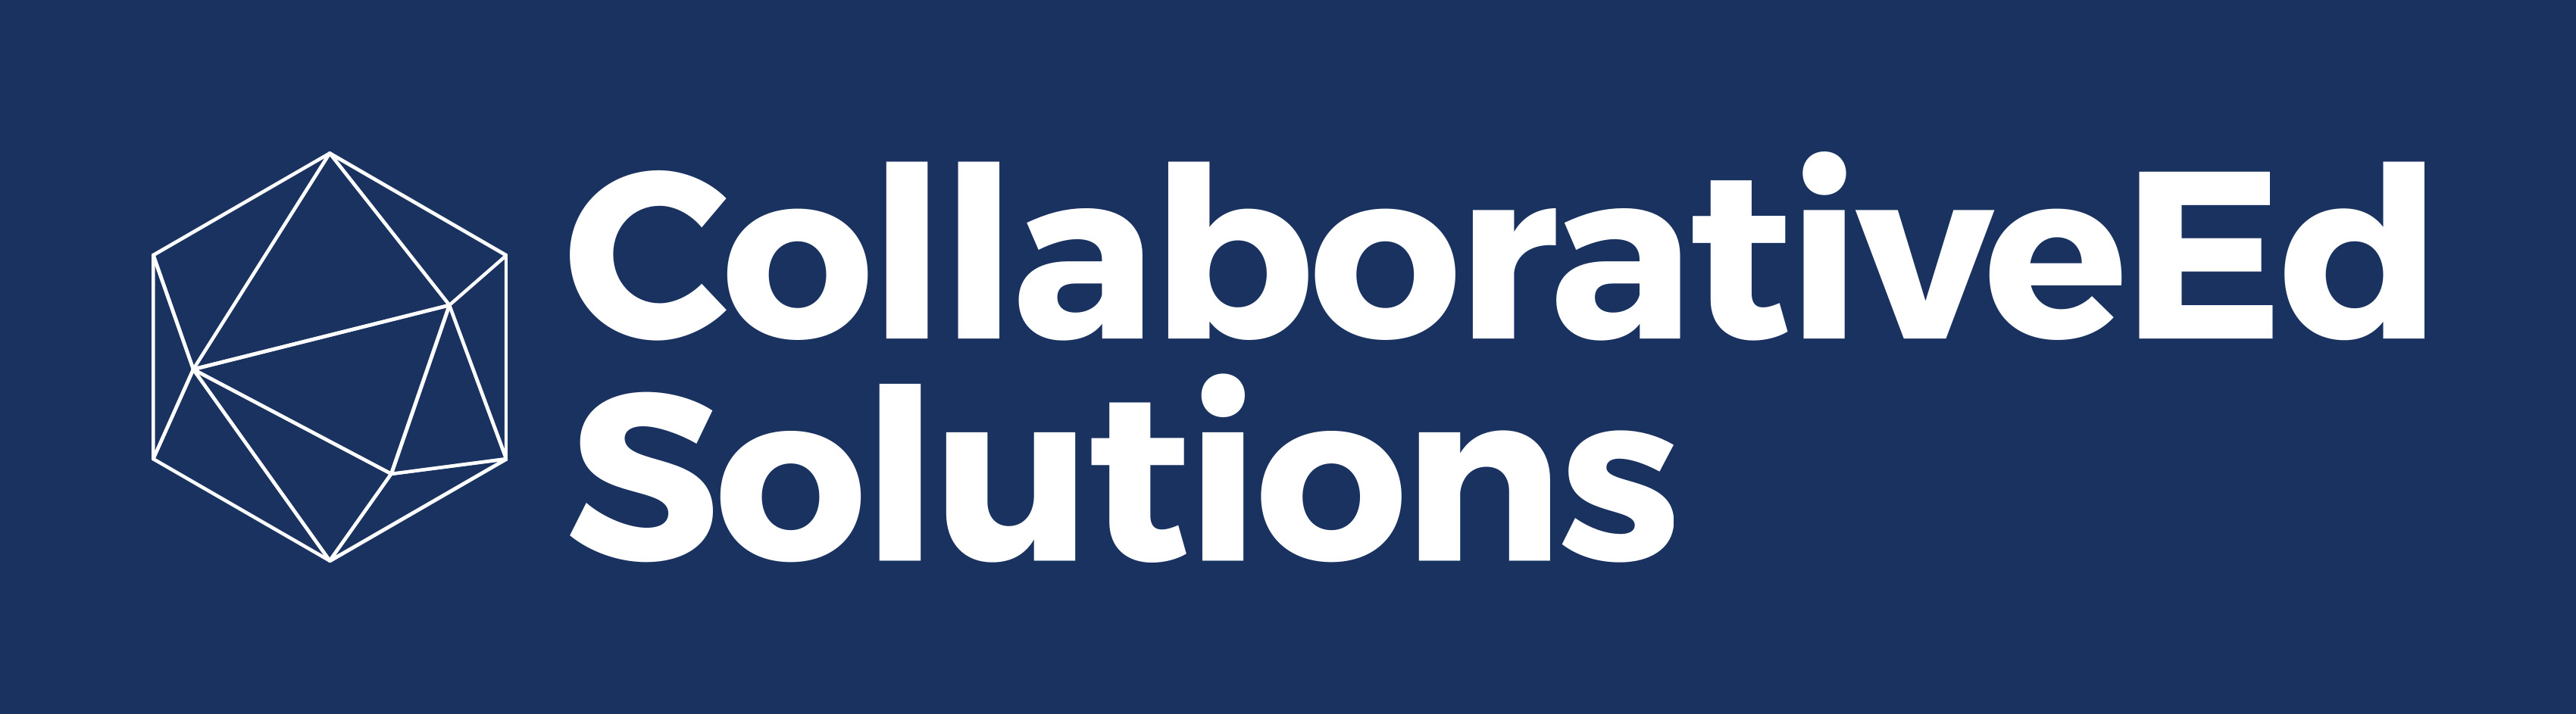 CollaborativeEd Solutions